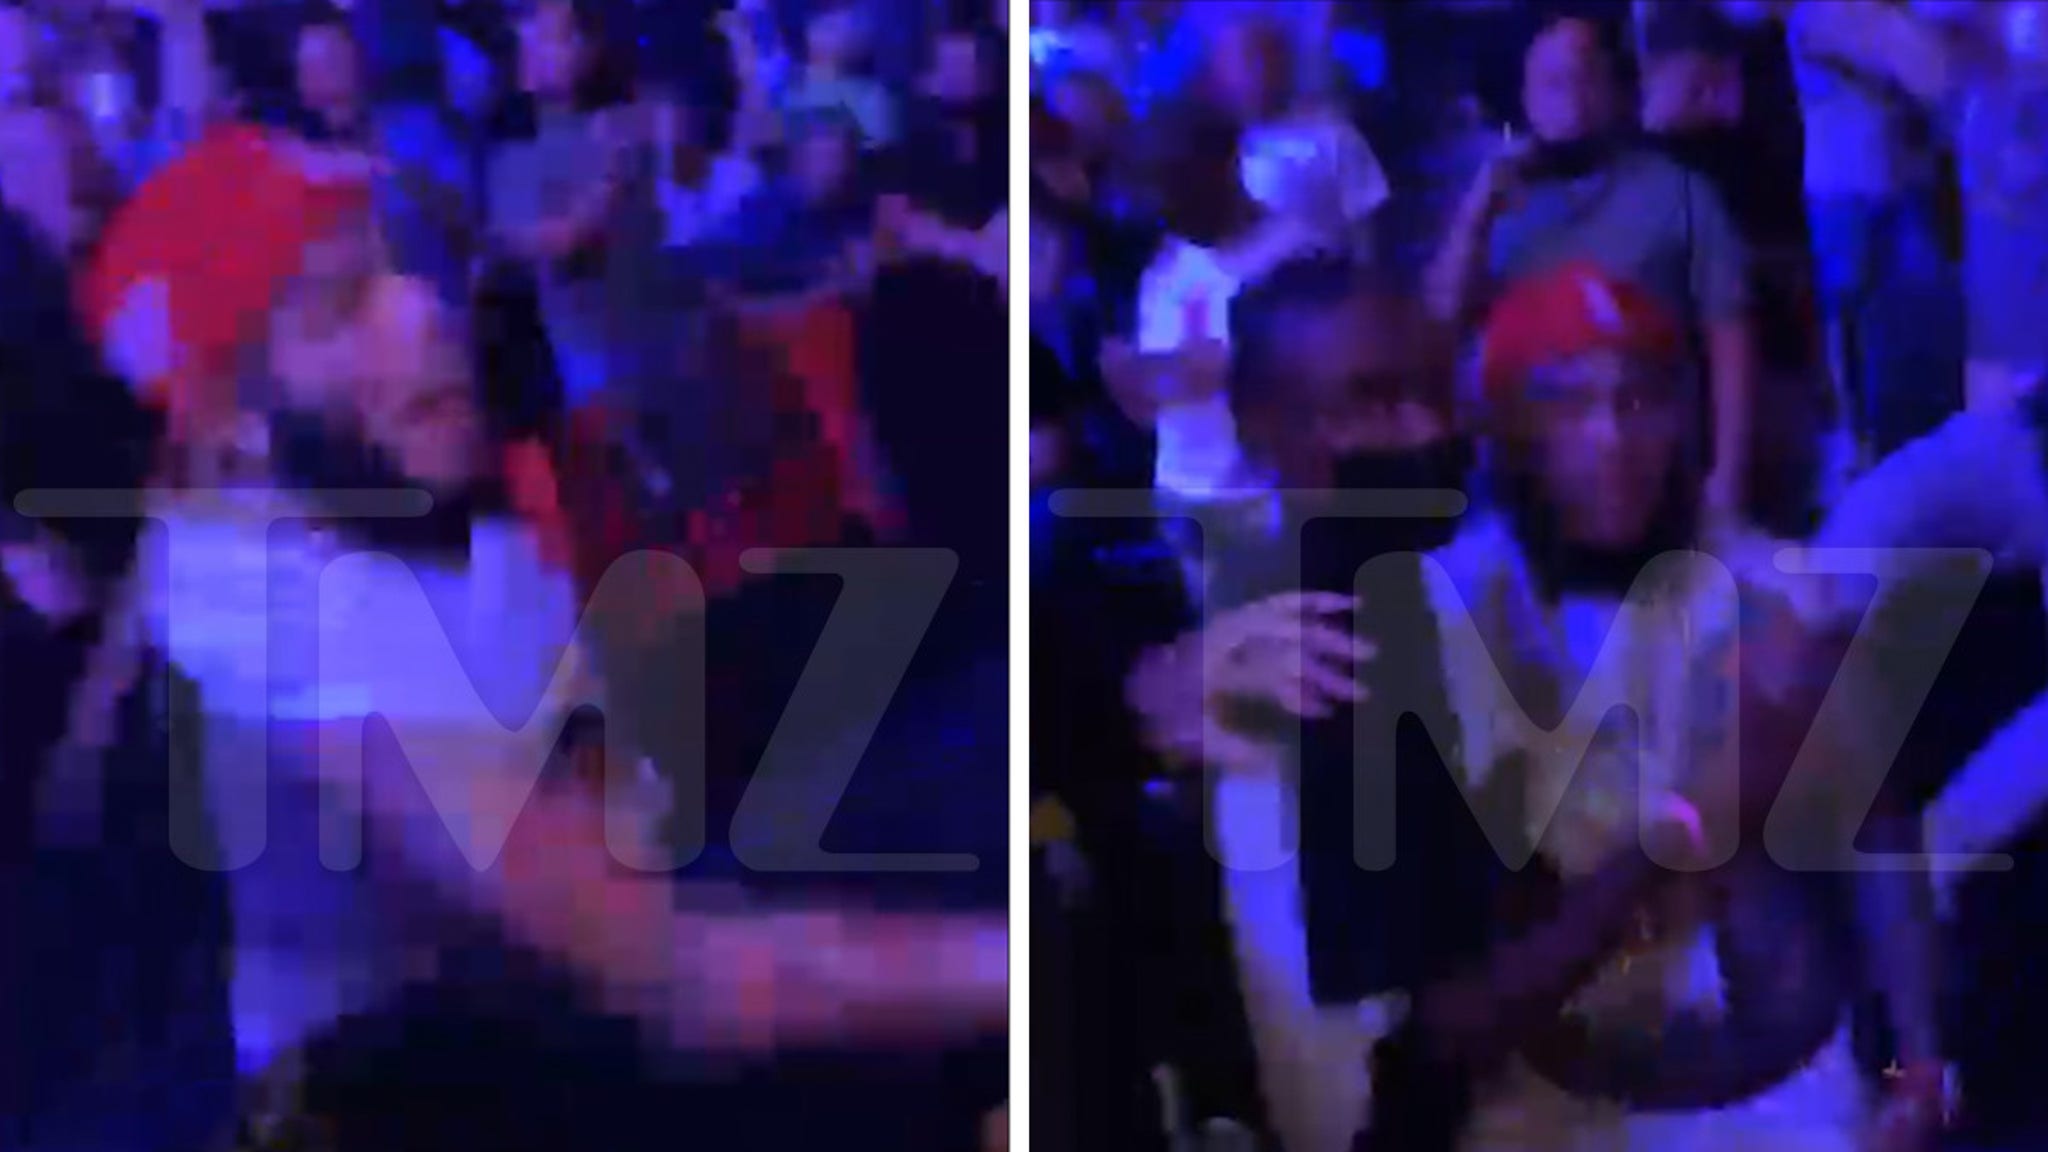 6ix9ine Gets Drink Thrown at Him, Chucks His Right Back at UFC Fight